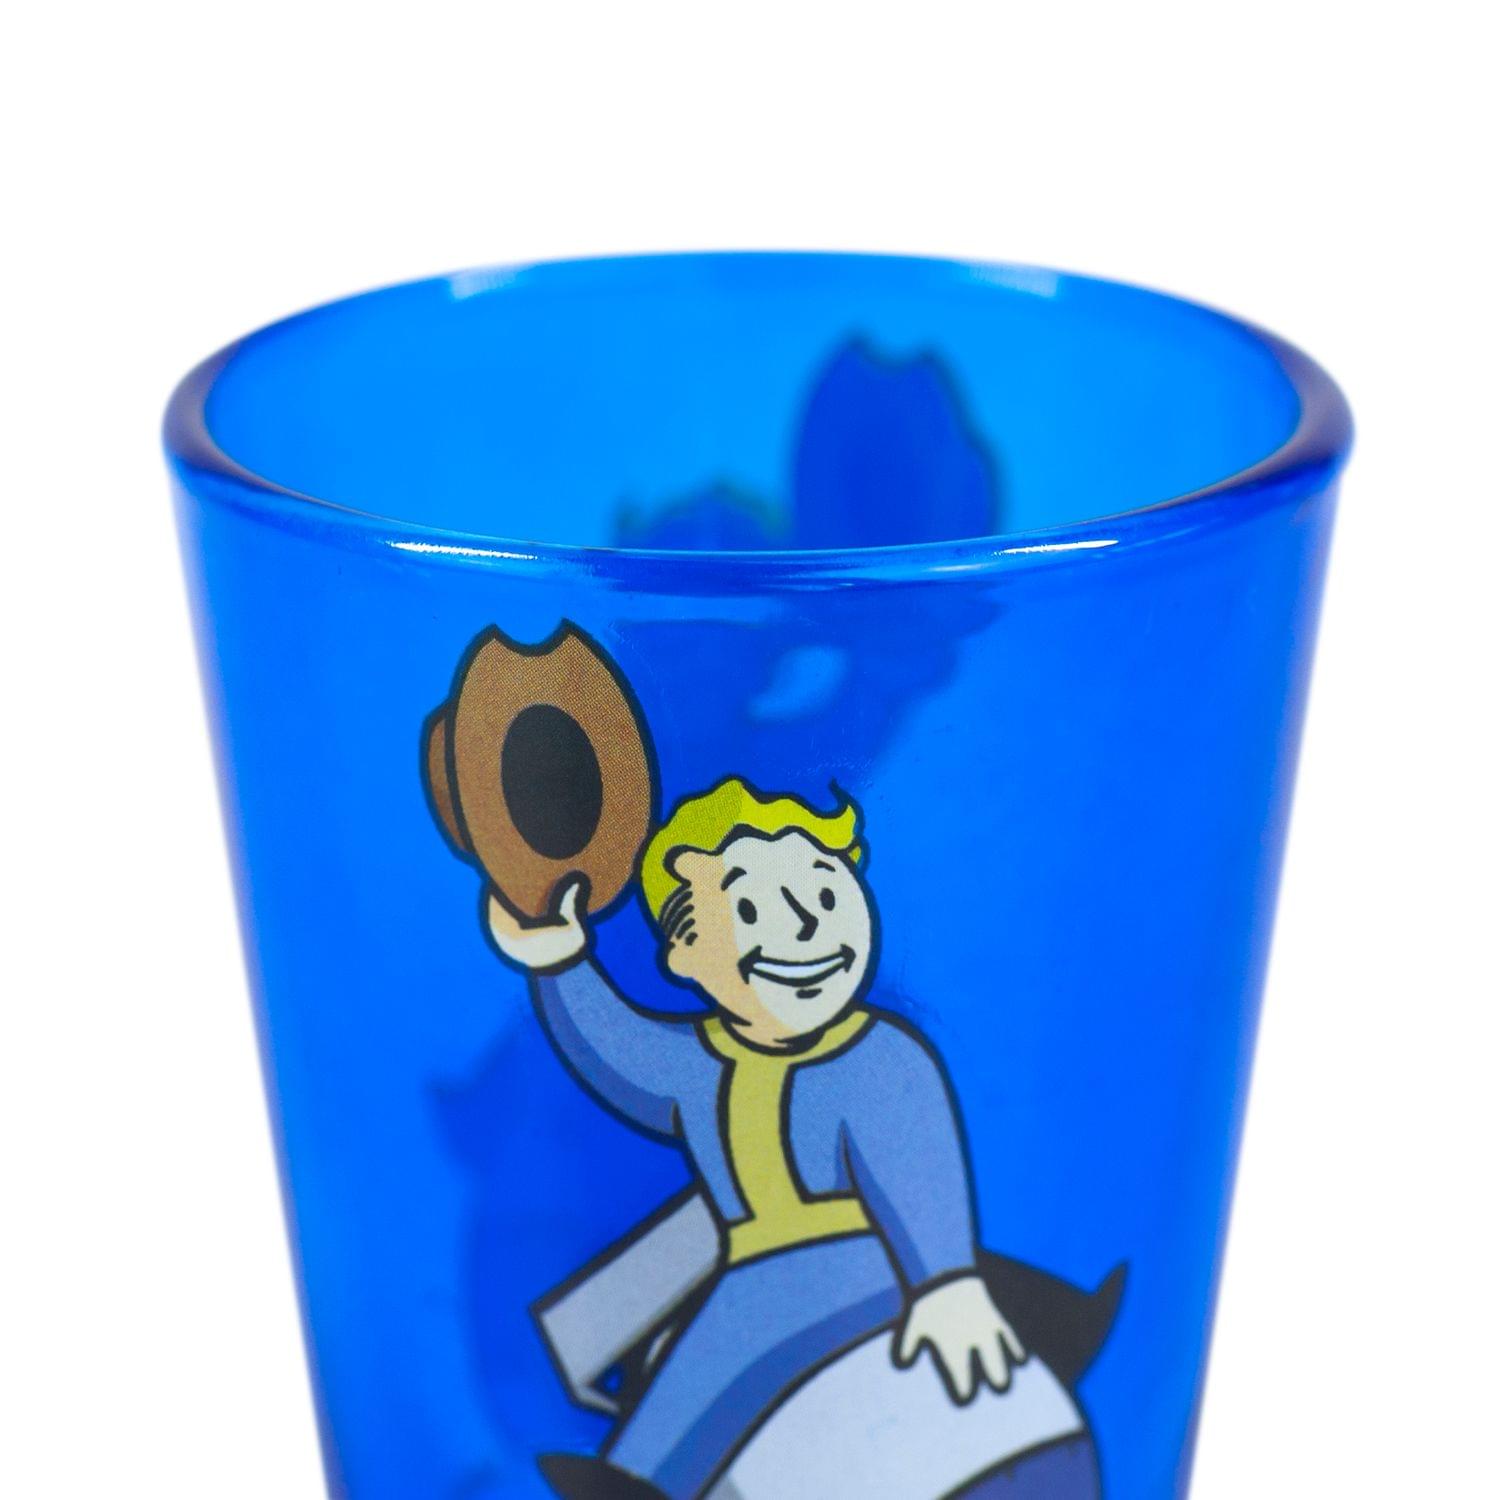 Fallout Series Vault Boy Riding A Nuke Collectible Shot Glass | Holds 1.5 Ounces